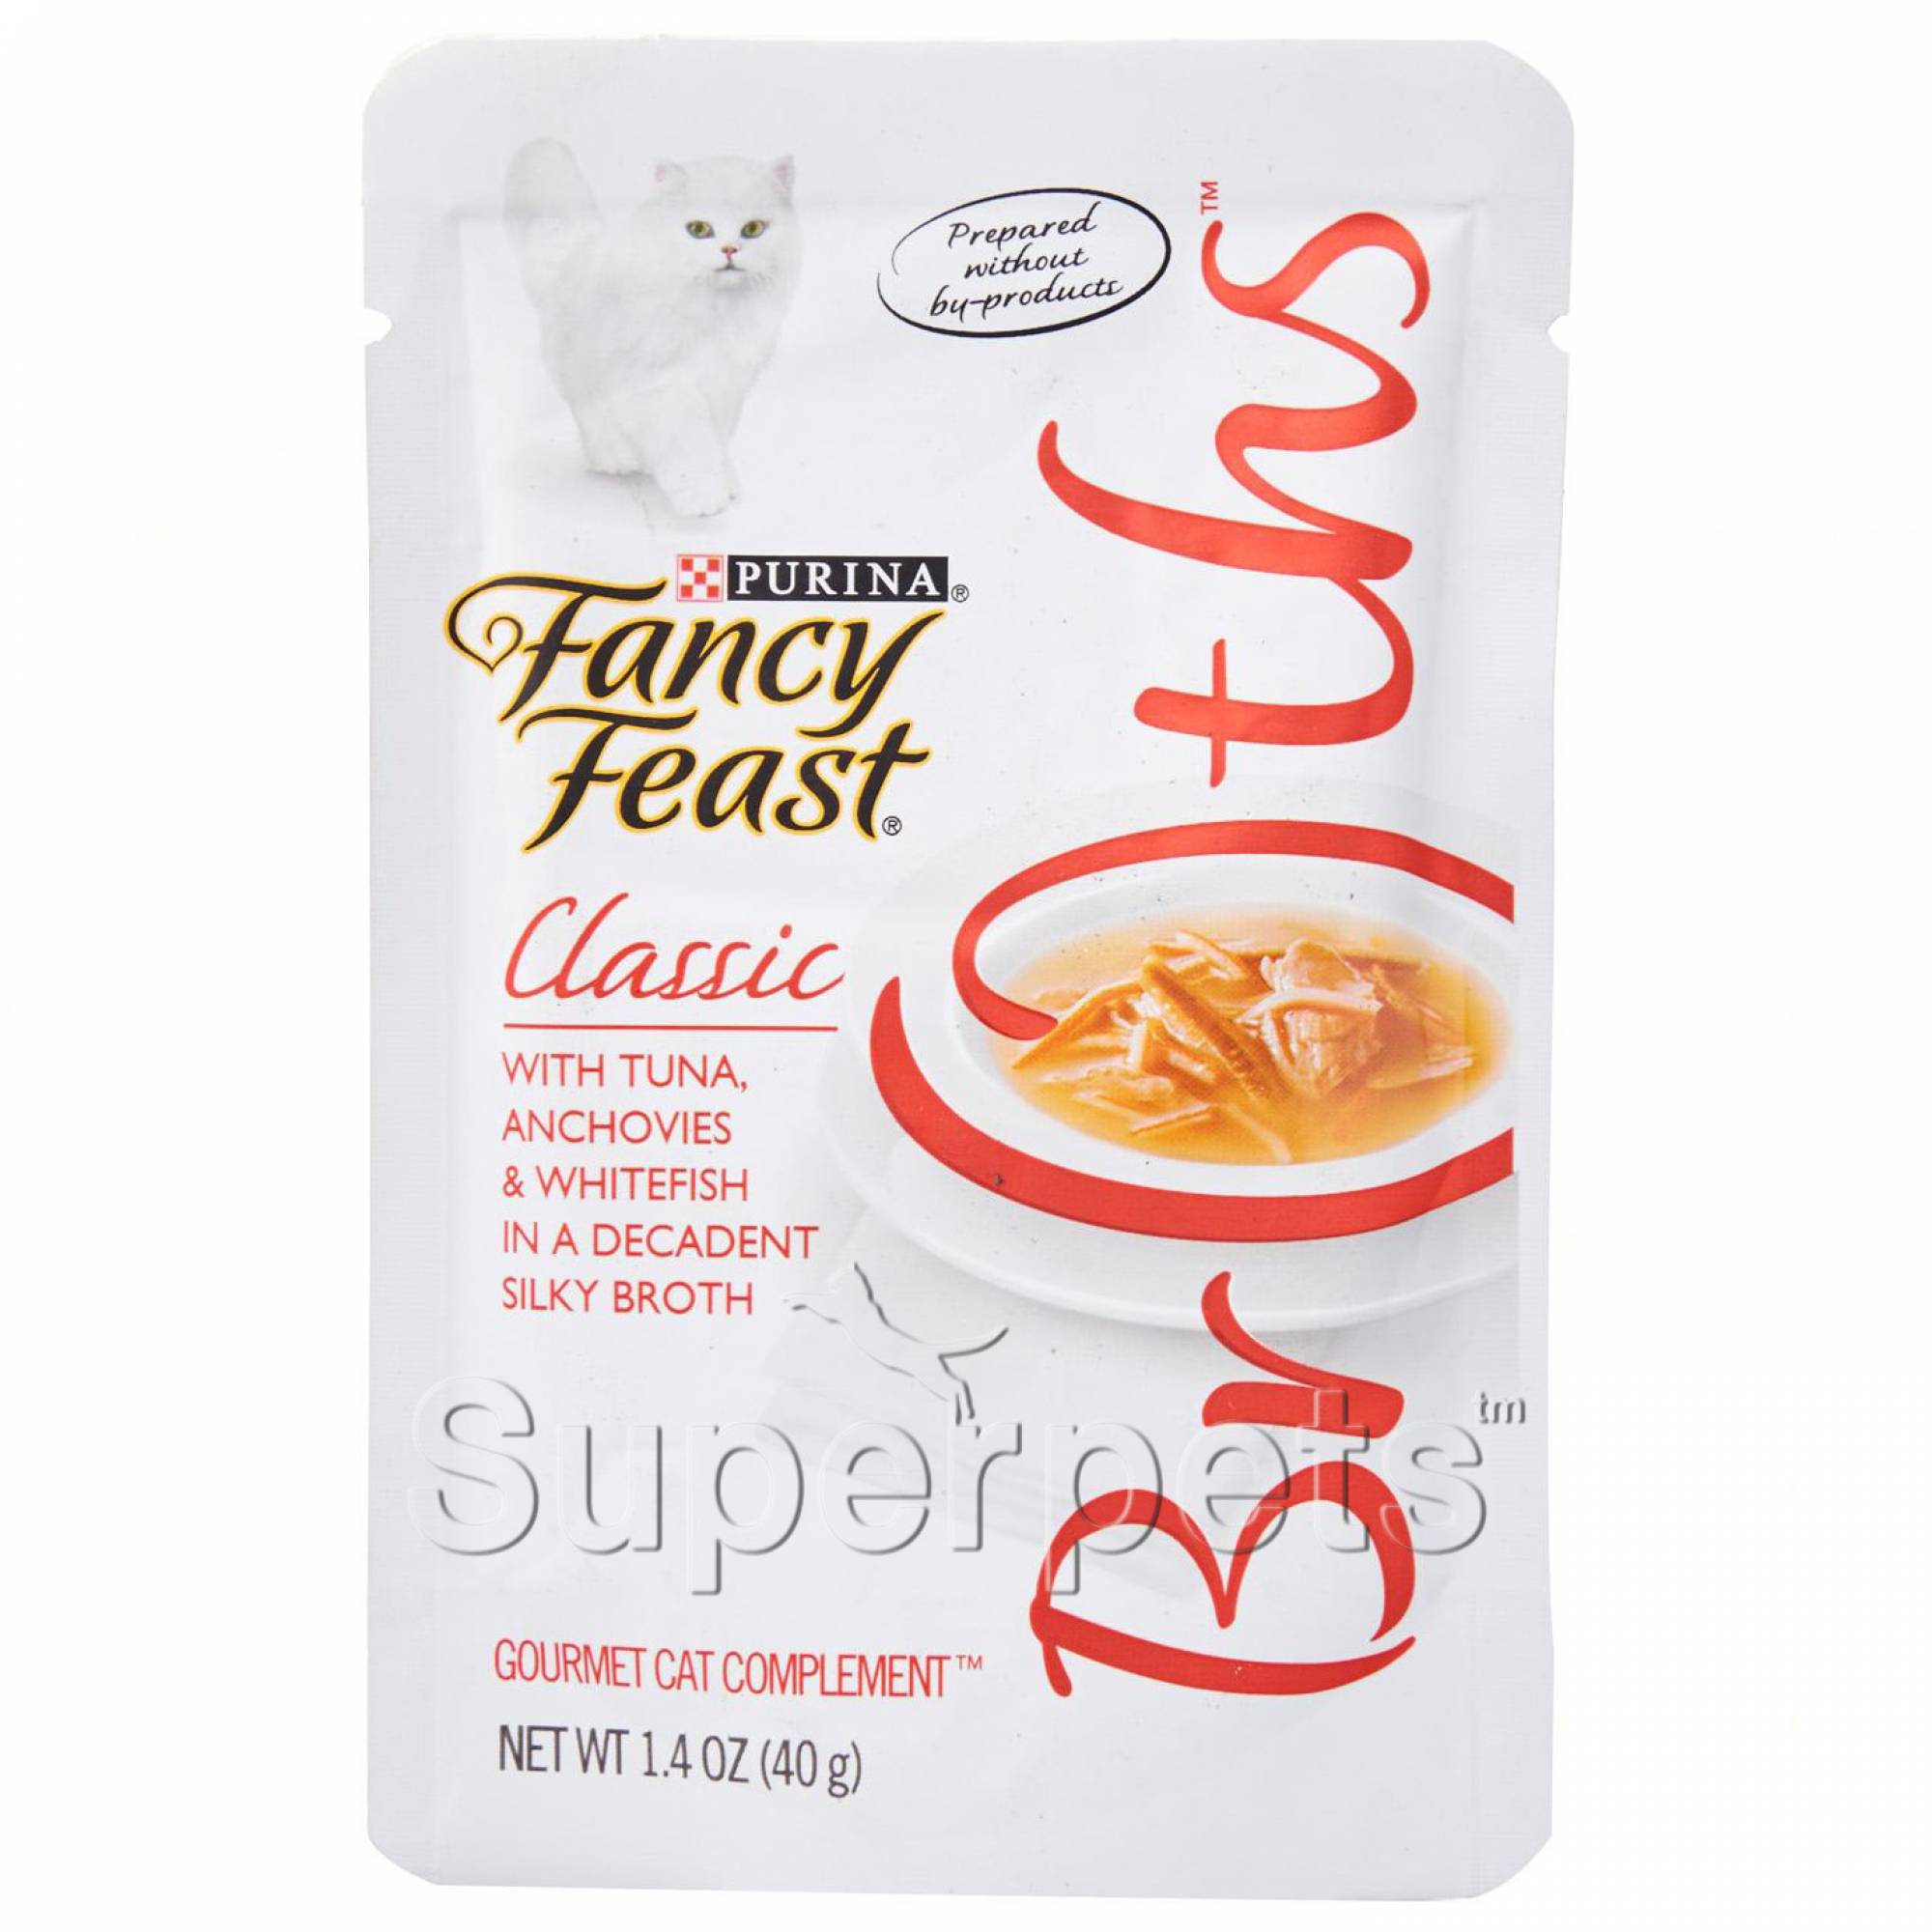 Fancy Feast - Broths - Classic with Tuna, Anchovies & Whitefish in a Decadent Silky Broth 40g